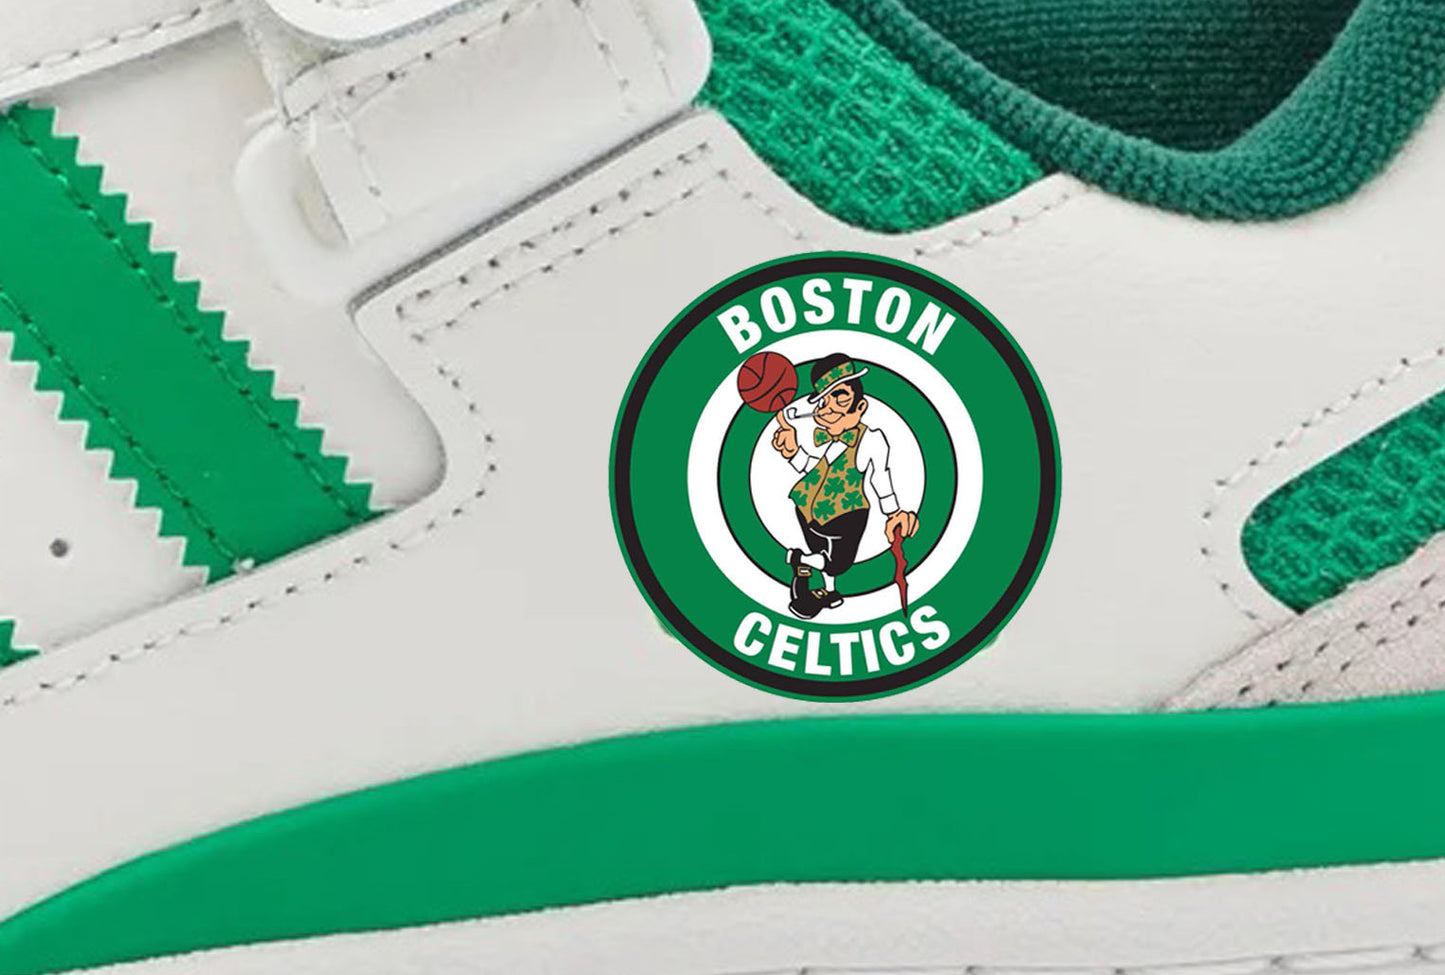 Limited edition White / Green Boston Celtics Adidas Forum low trainers / sneakers